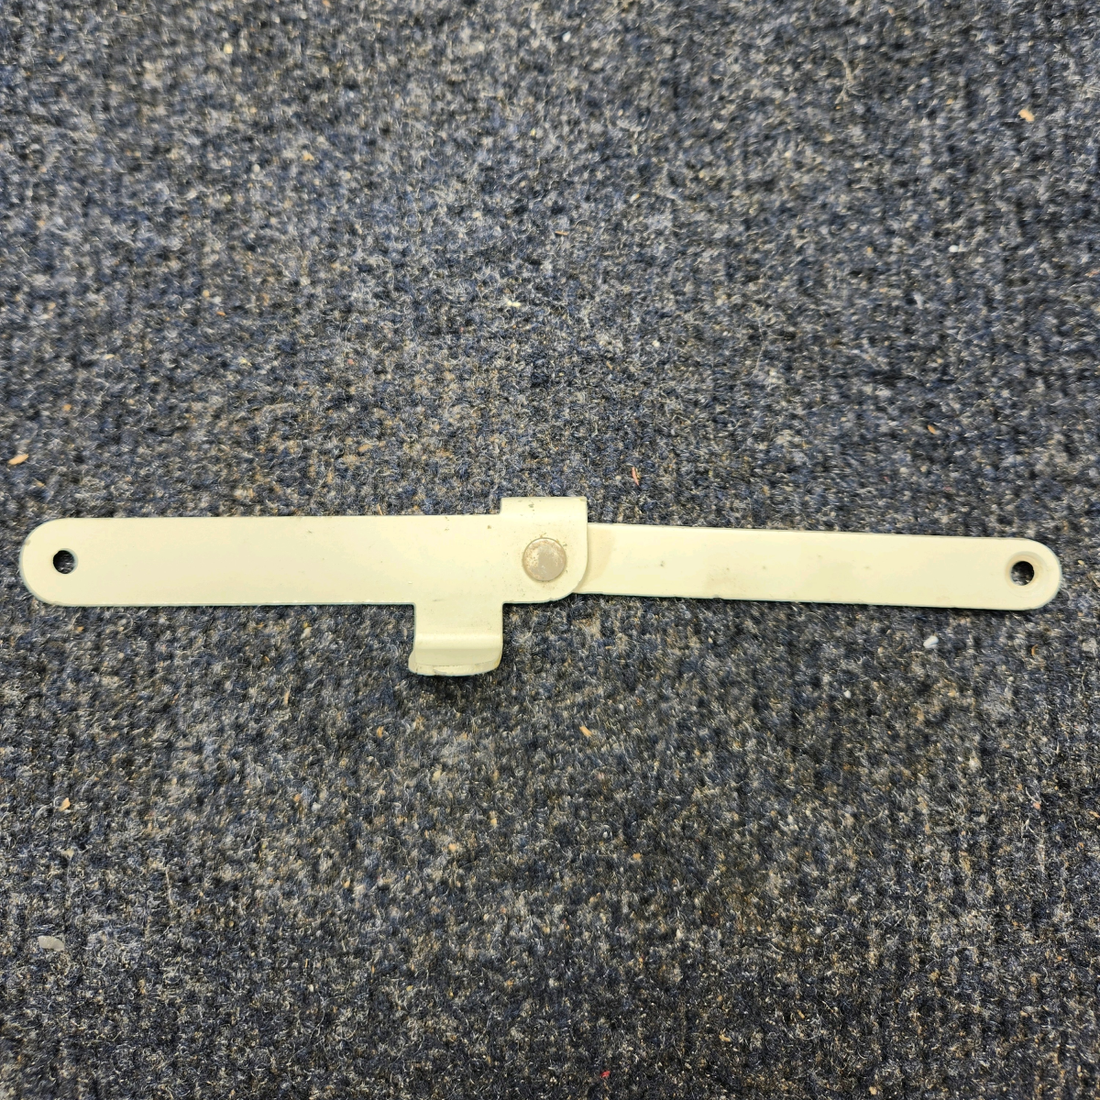 Used aircraft parts for sale, 913020-002 Texas Several MOONEY ARM ASSY BAGGAGE DOOR OPEN PRICE PER EACH